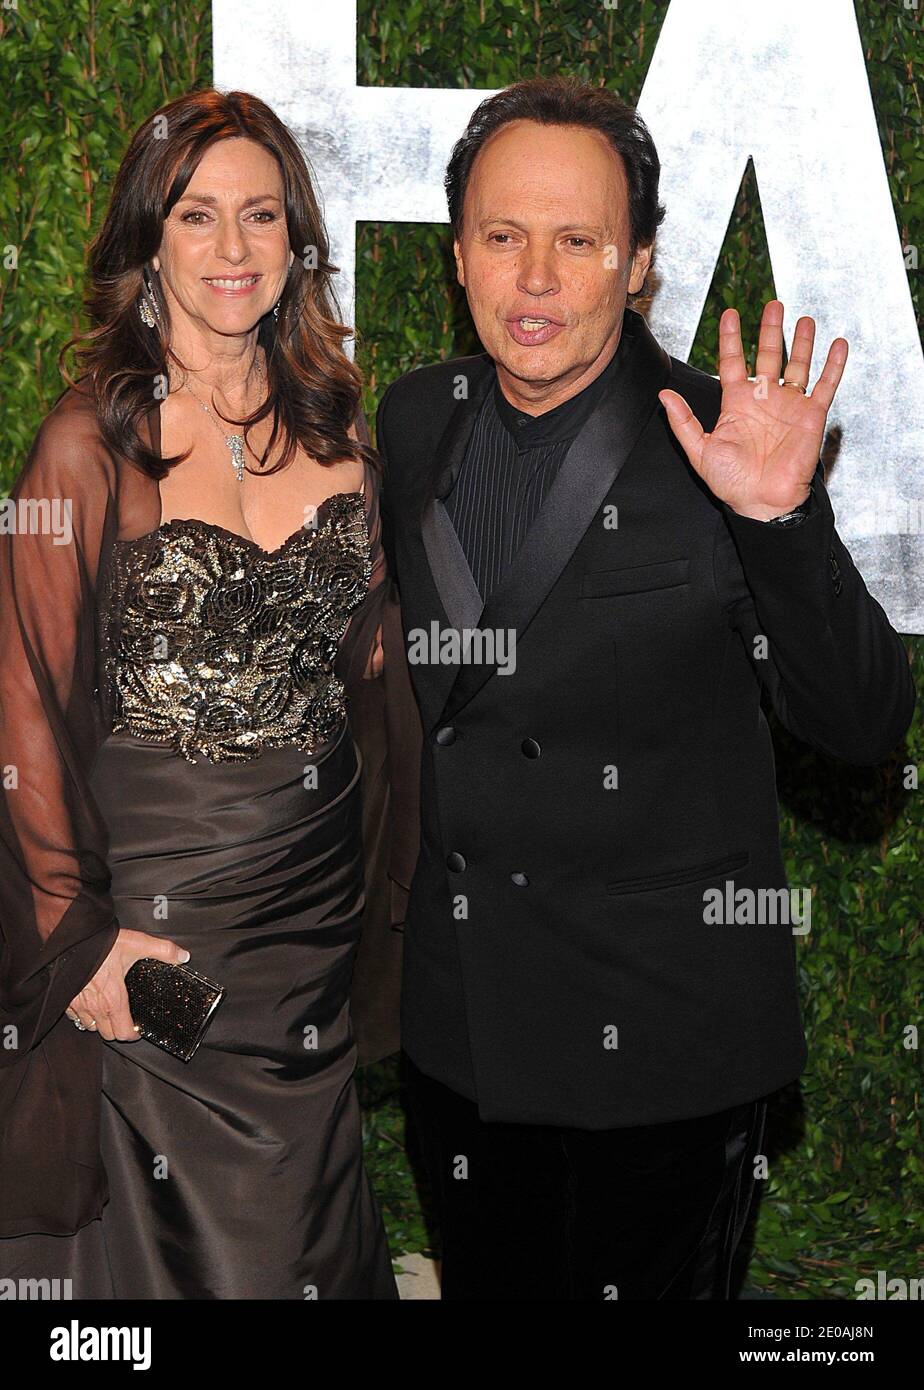 Billy Crystal and wife Janice arriving at the 2012 Vanity Fair Oscar Party, hosted by Graydon Carter, held at the Sunset Tower Hotel in Los Angeles, CA on February 26, 2012. Photo by Vince Bucci/ABACAPRESS.COM Stock Photo